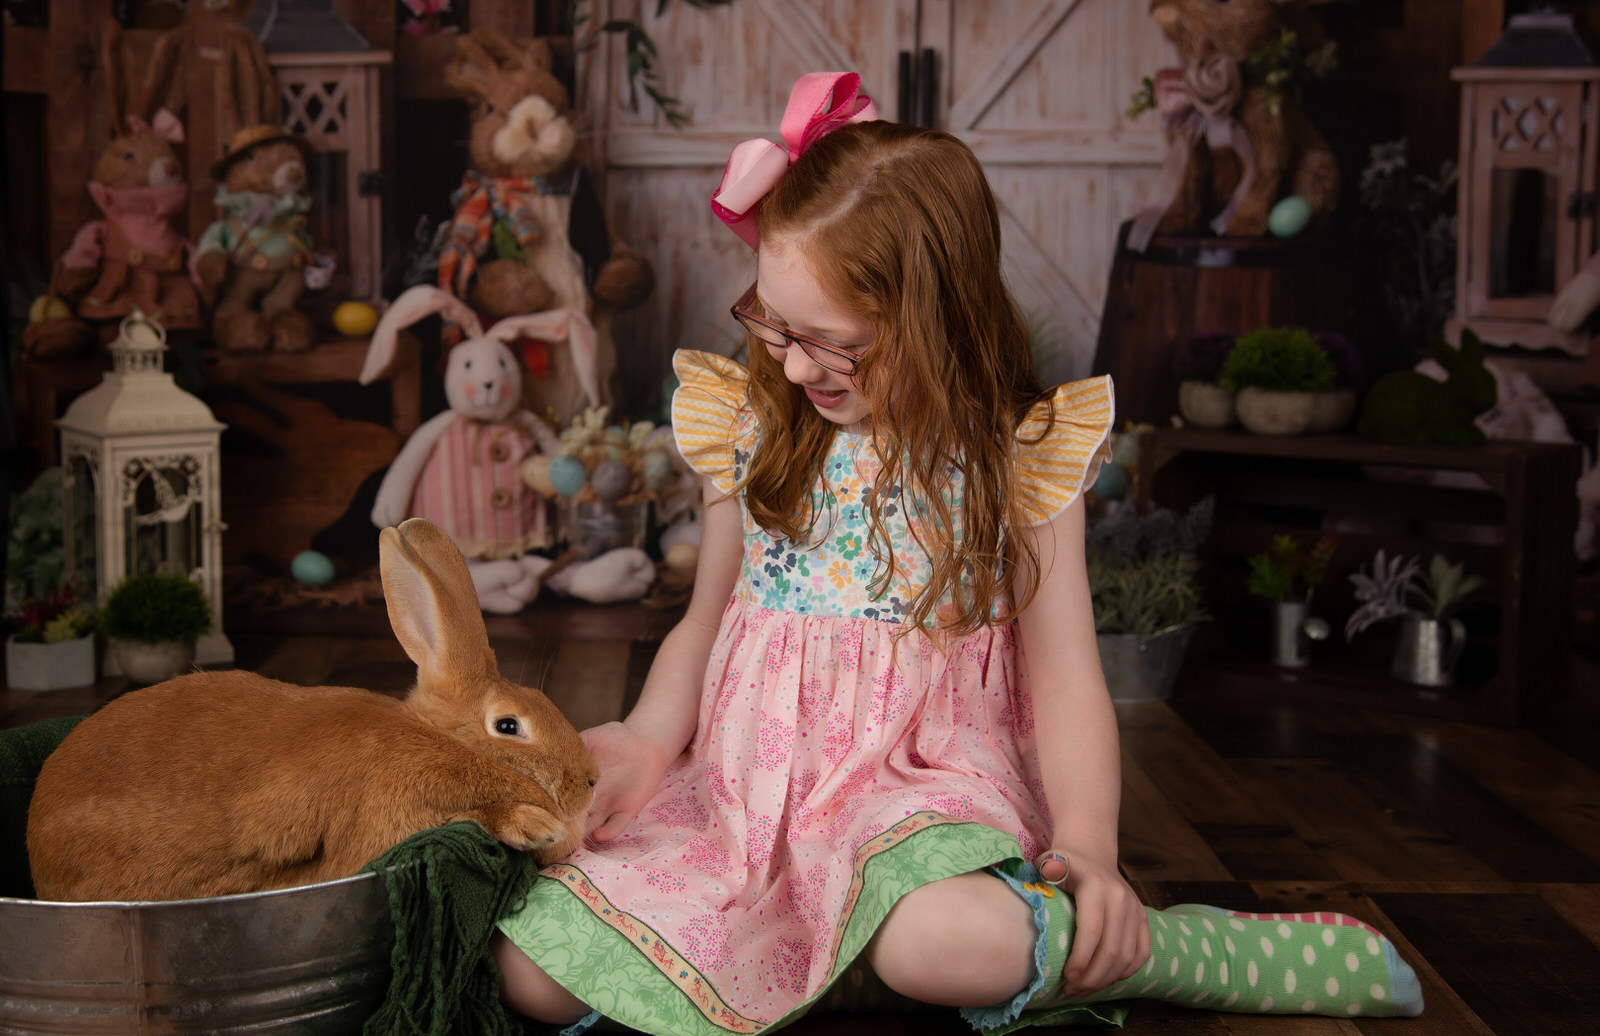 A young girl in a colorful dress and socks pets a bunny in a tin bucket